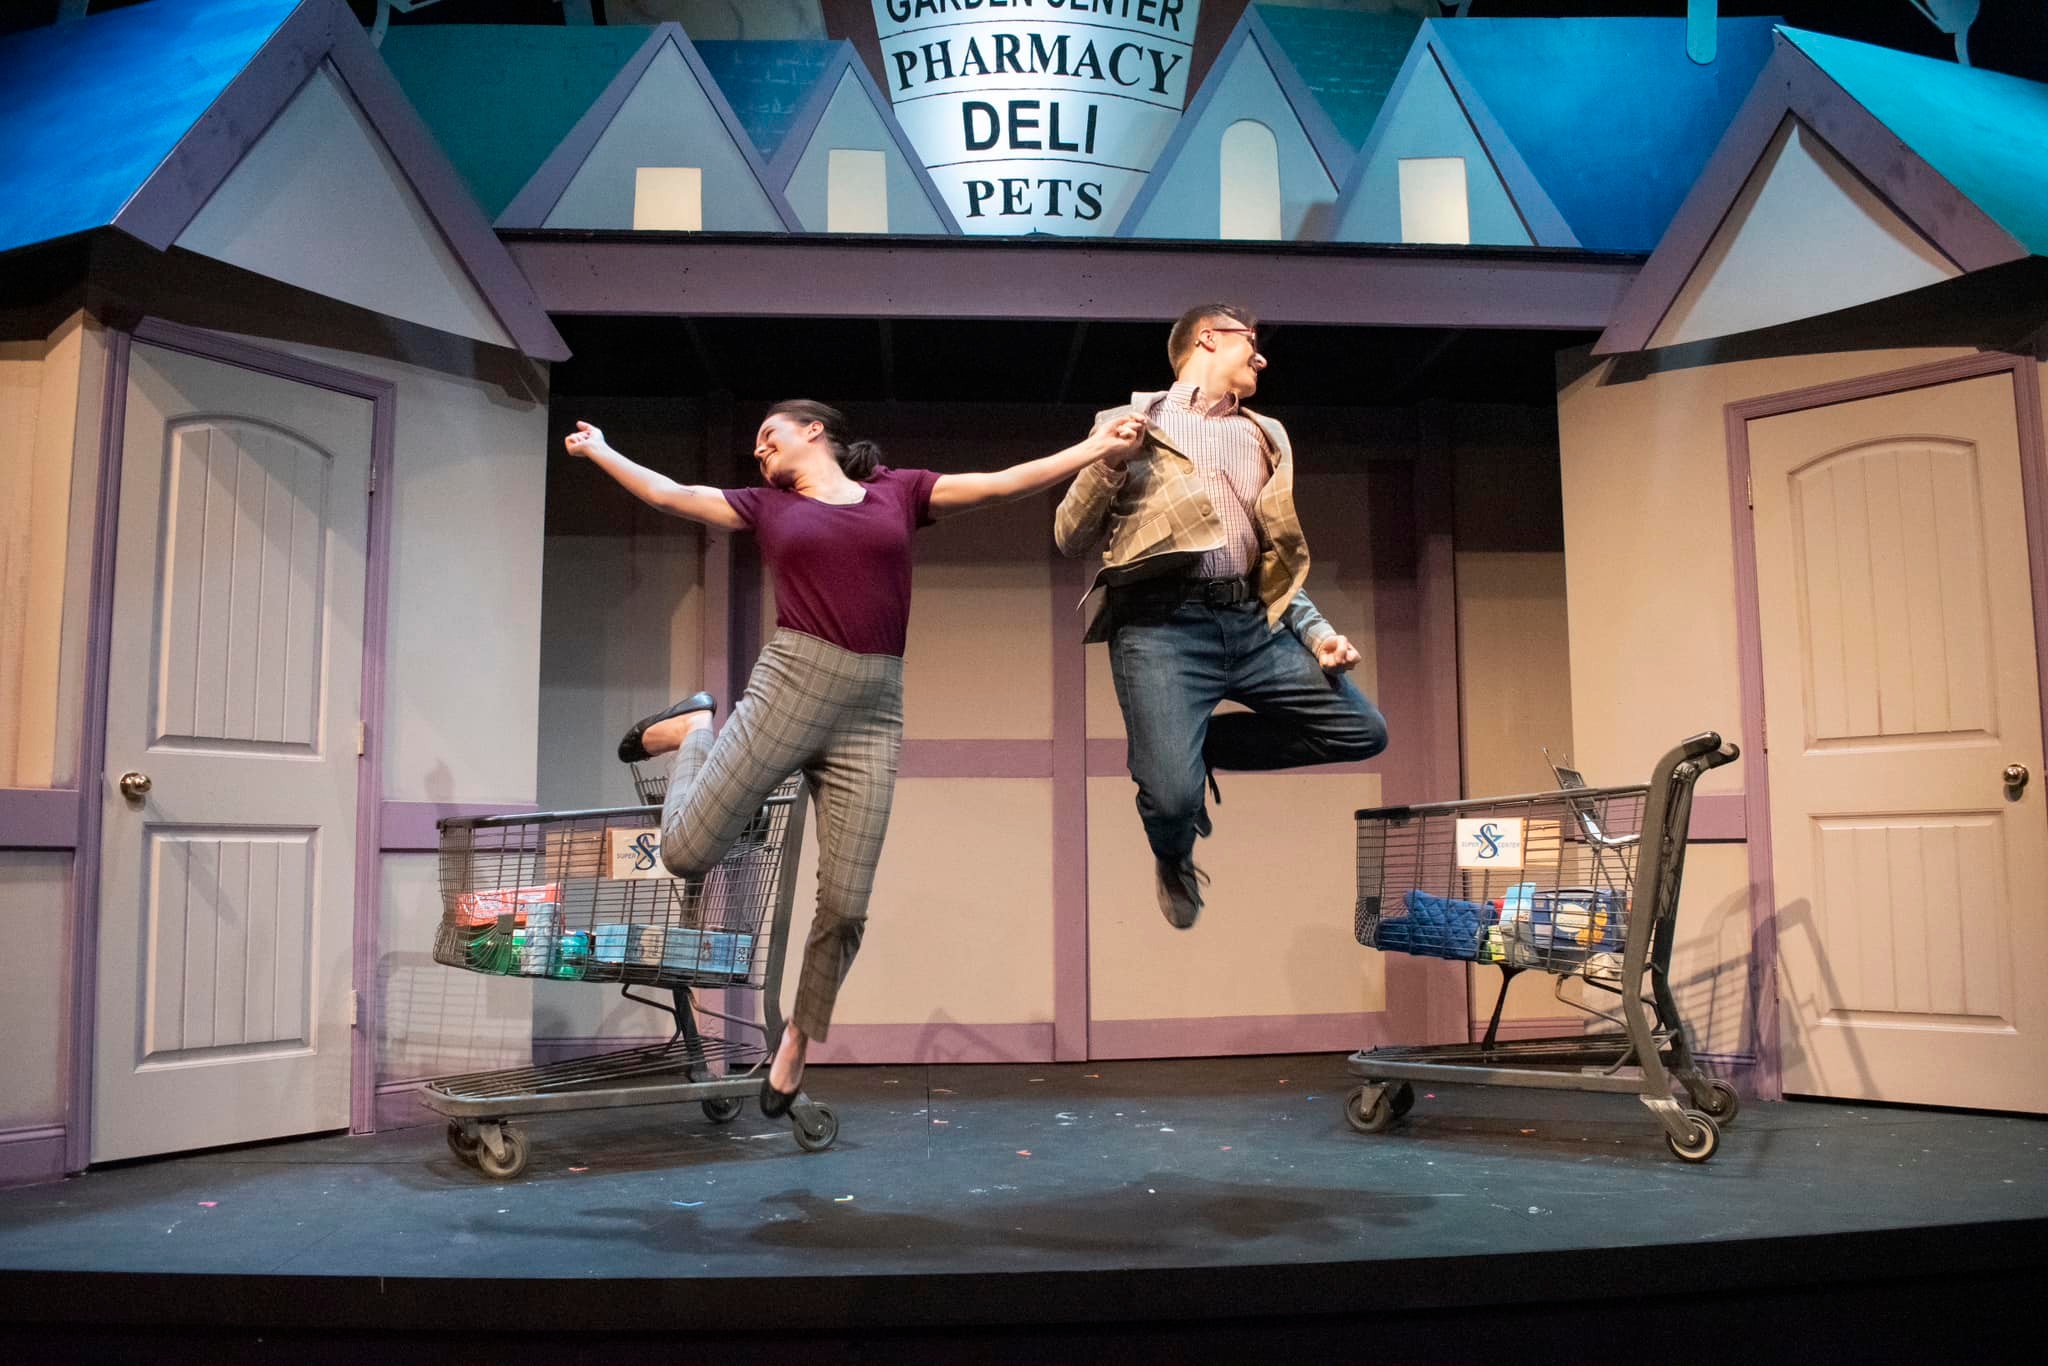 Two actors leaping into the air on a stage set to look like a grocery store, with two shopping carts and two doors on the left and right sides of the stage.